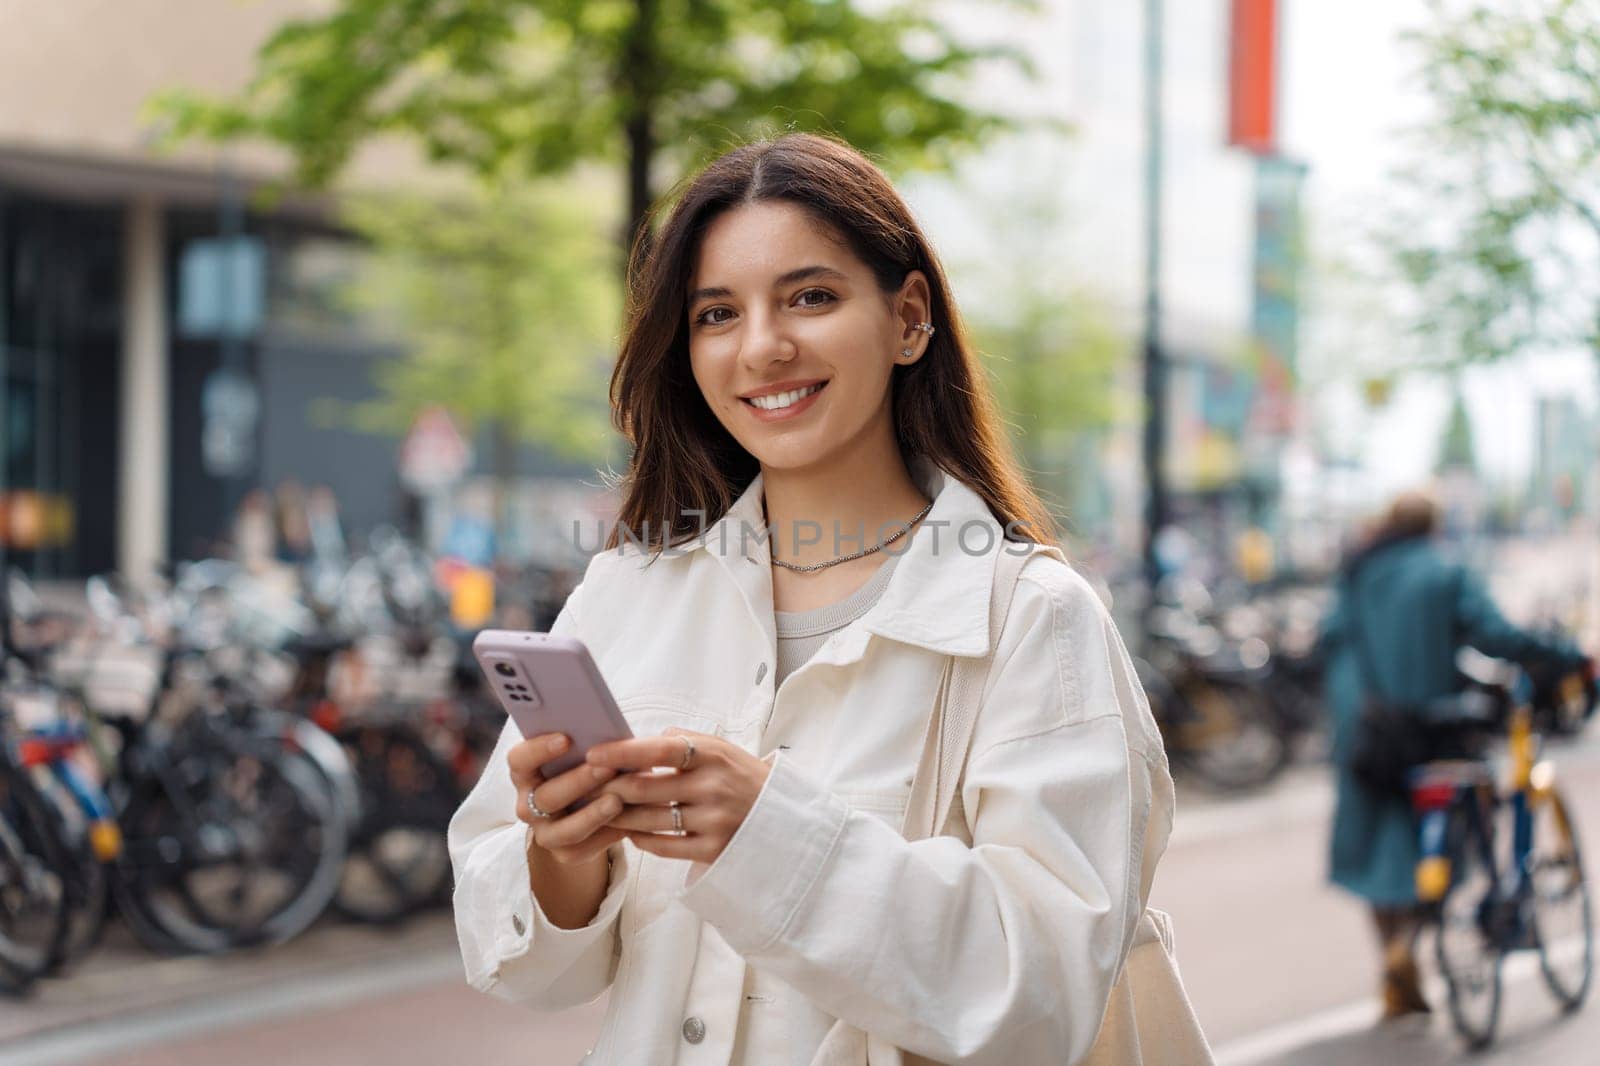 Mixed-race LGBT proud and confident Turkish young woman holding a phone in the street smiling wearing white casual clothes.